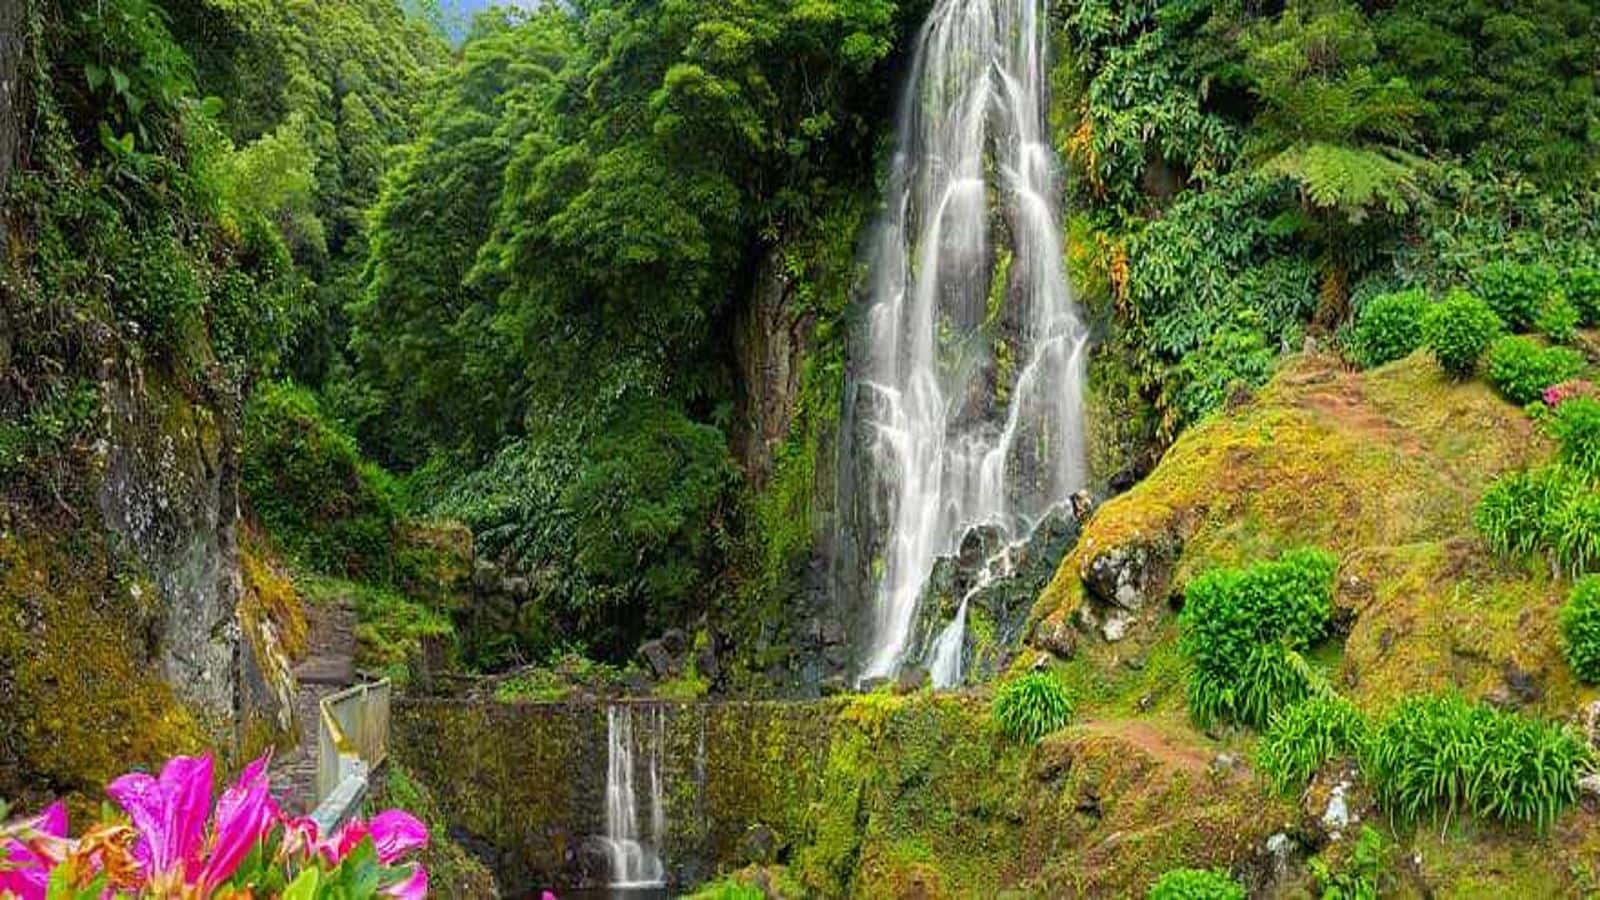 Azores in spring: Portugal's natural paradise unveiled